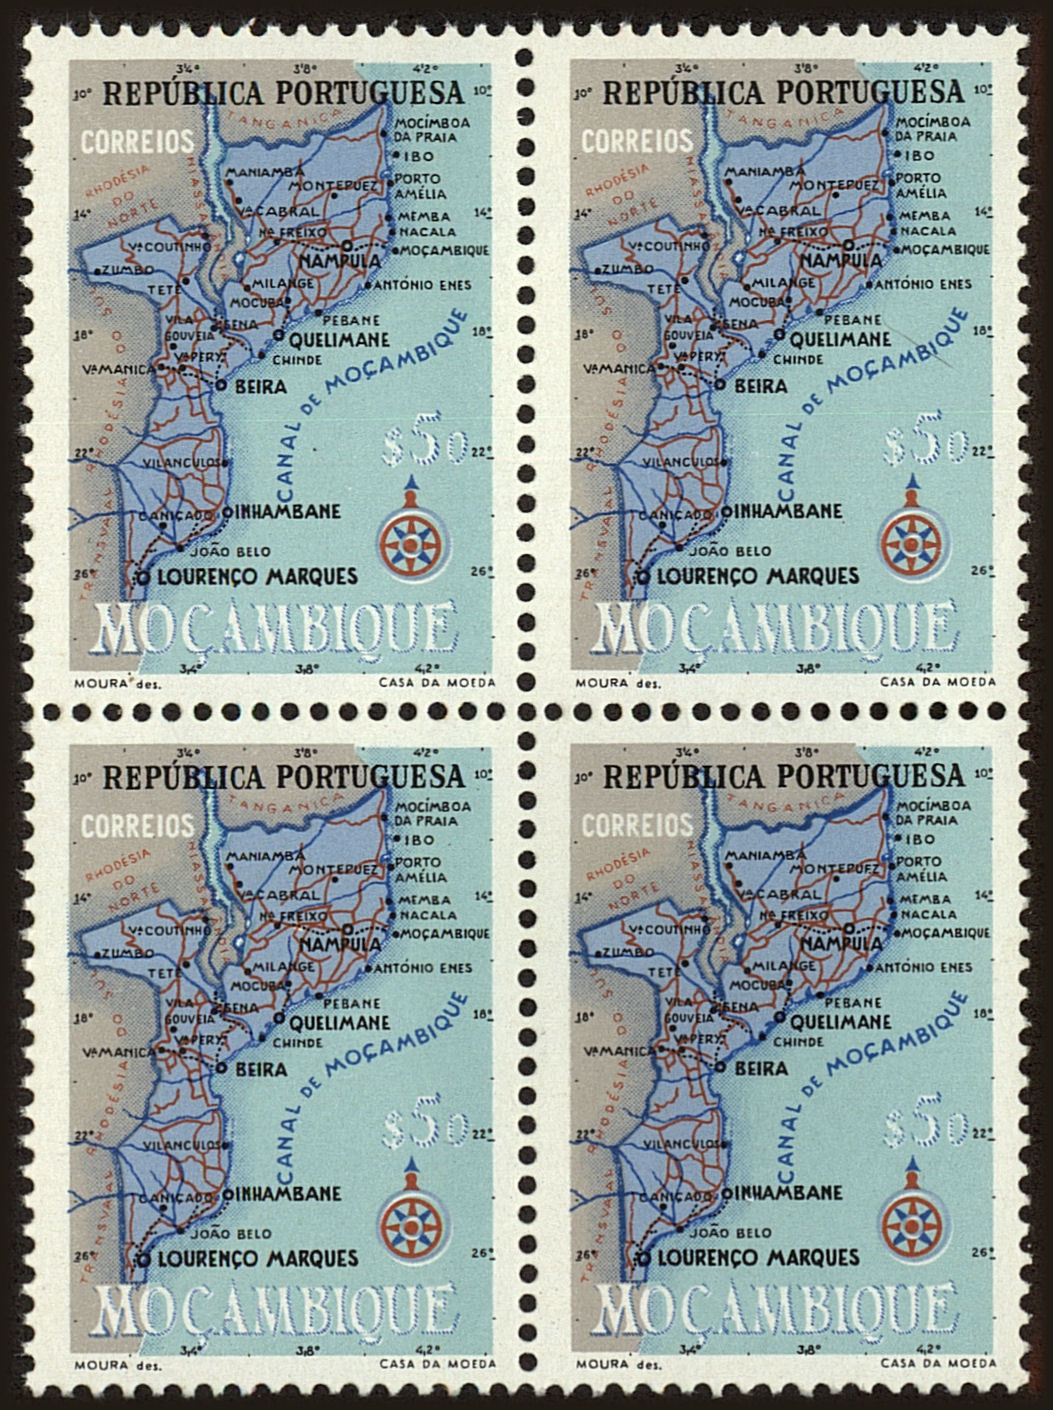 Front view of Mozambique 389 collectors stamp